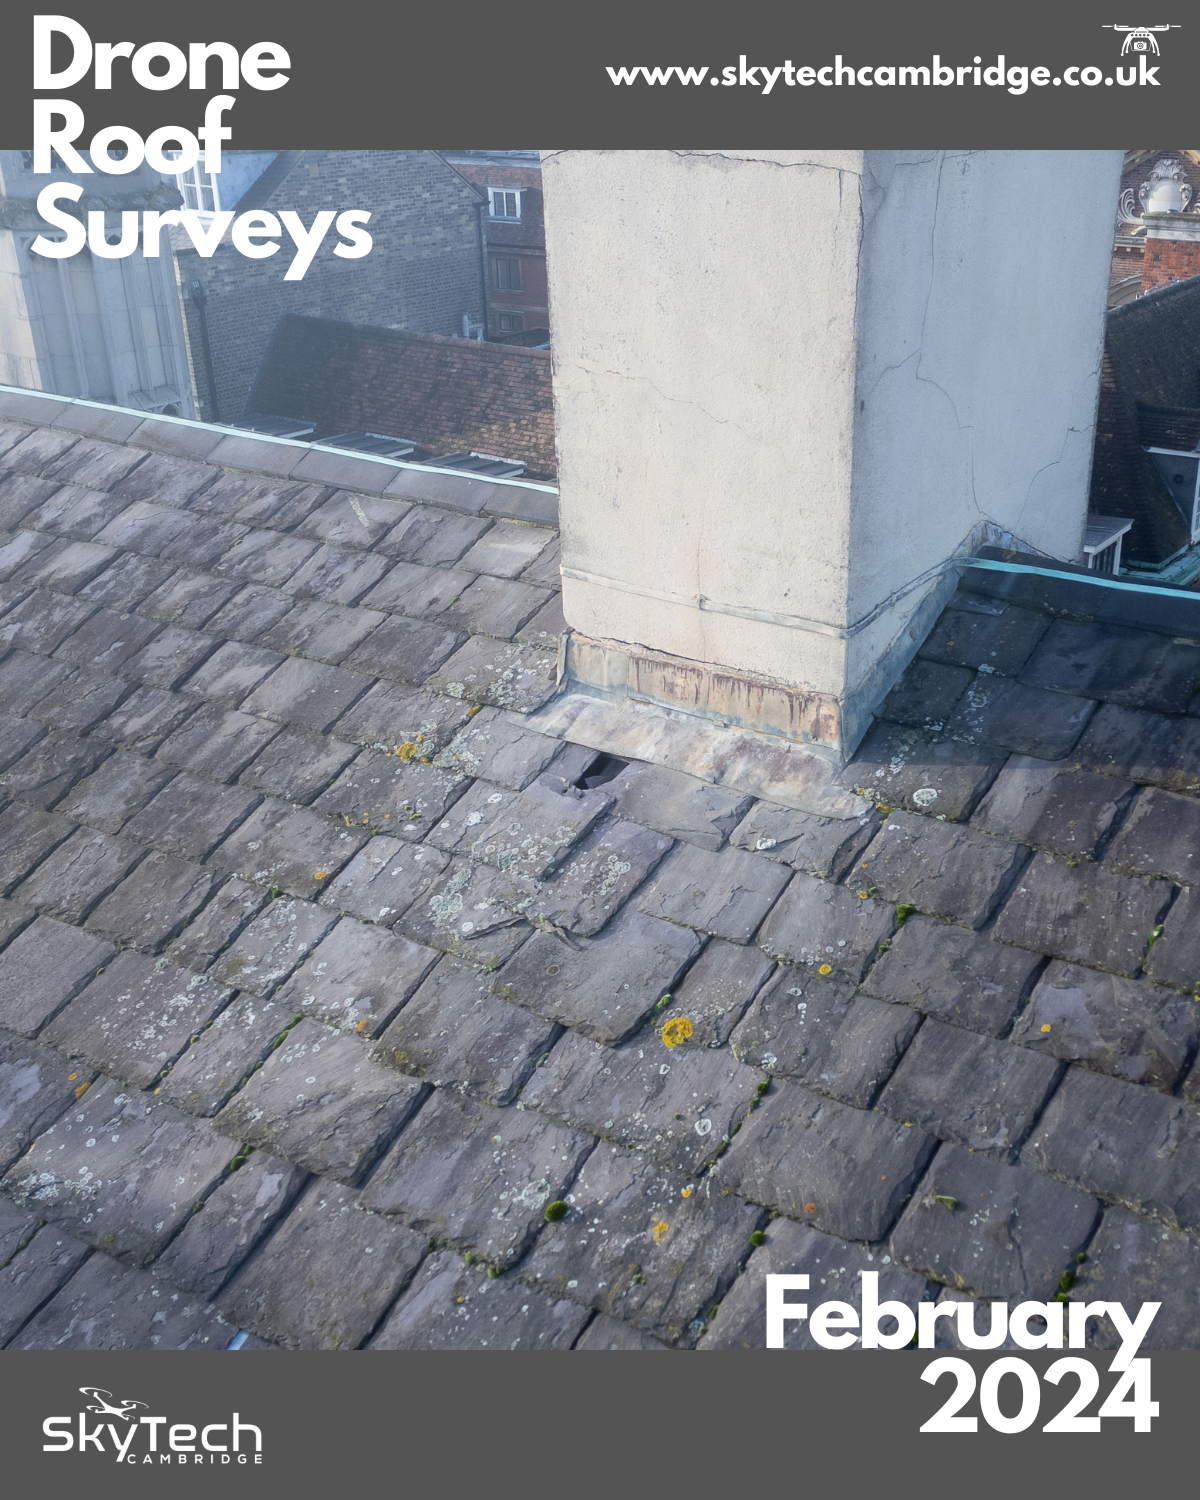 Missing roof tile captured with drone roof survey. The photo shows the underlying felt membrane.